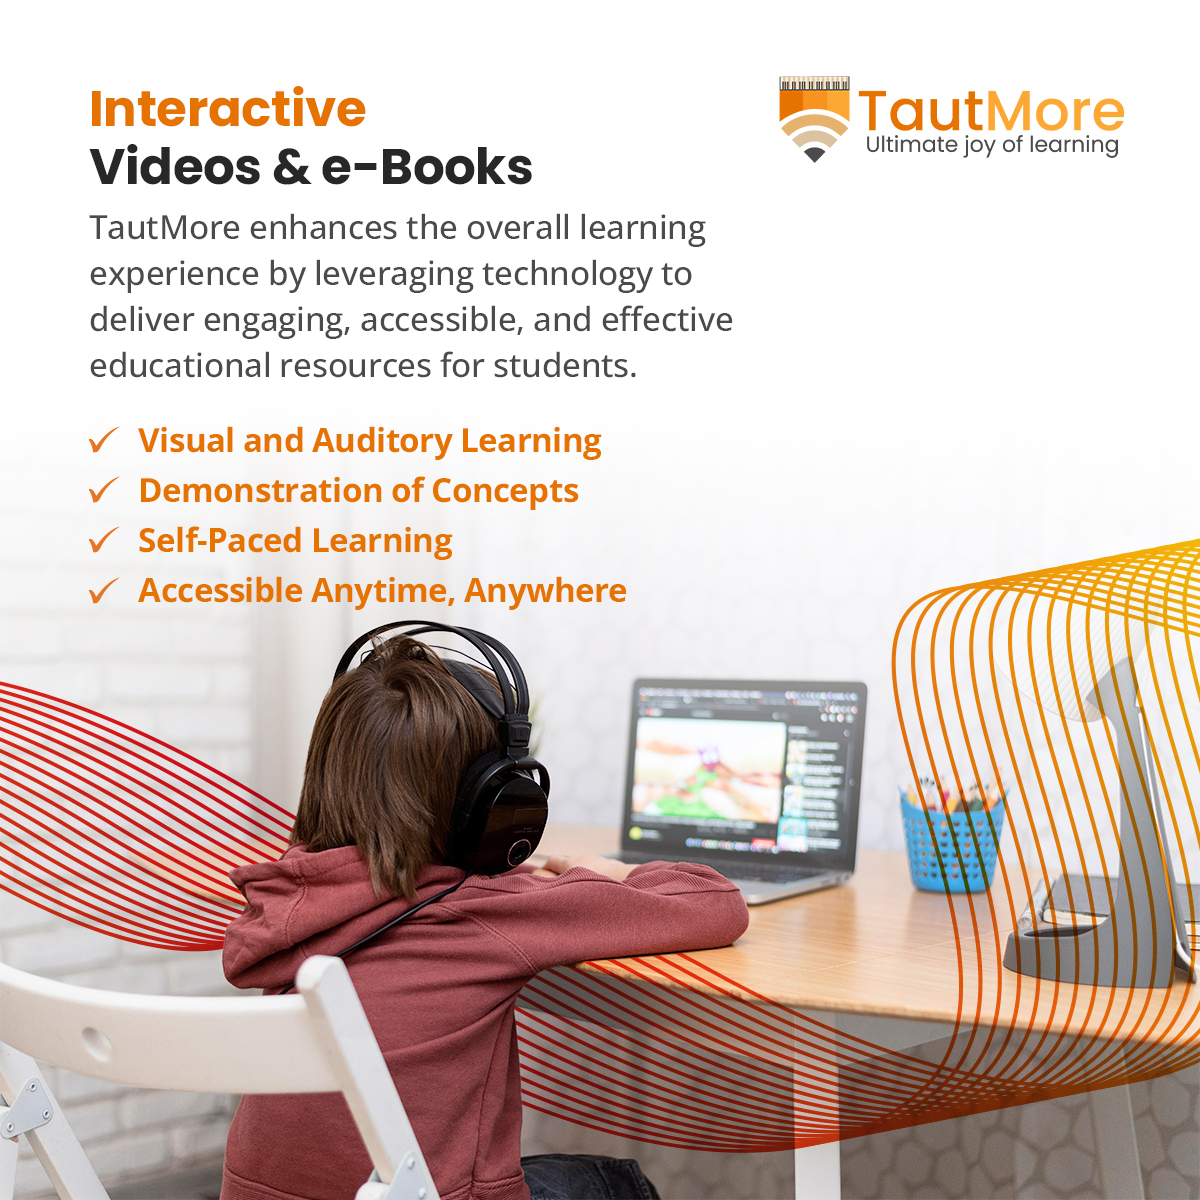 Explore our resources and begin a new chapter in your educational journey. Learn smarter and faster with TautMore — where technology meets education.

Book a Demo: tautmore.com/book-demo

#TautMoreEducation #InteractiveLearning #eLearning #EducationInnovation #DigitalResources